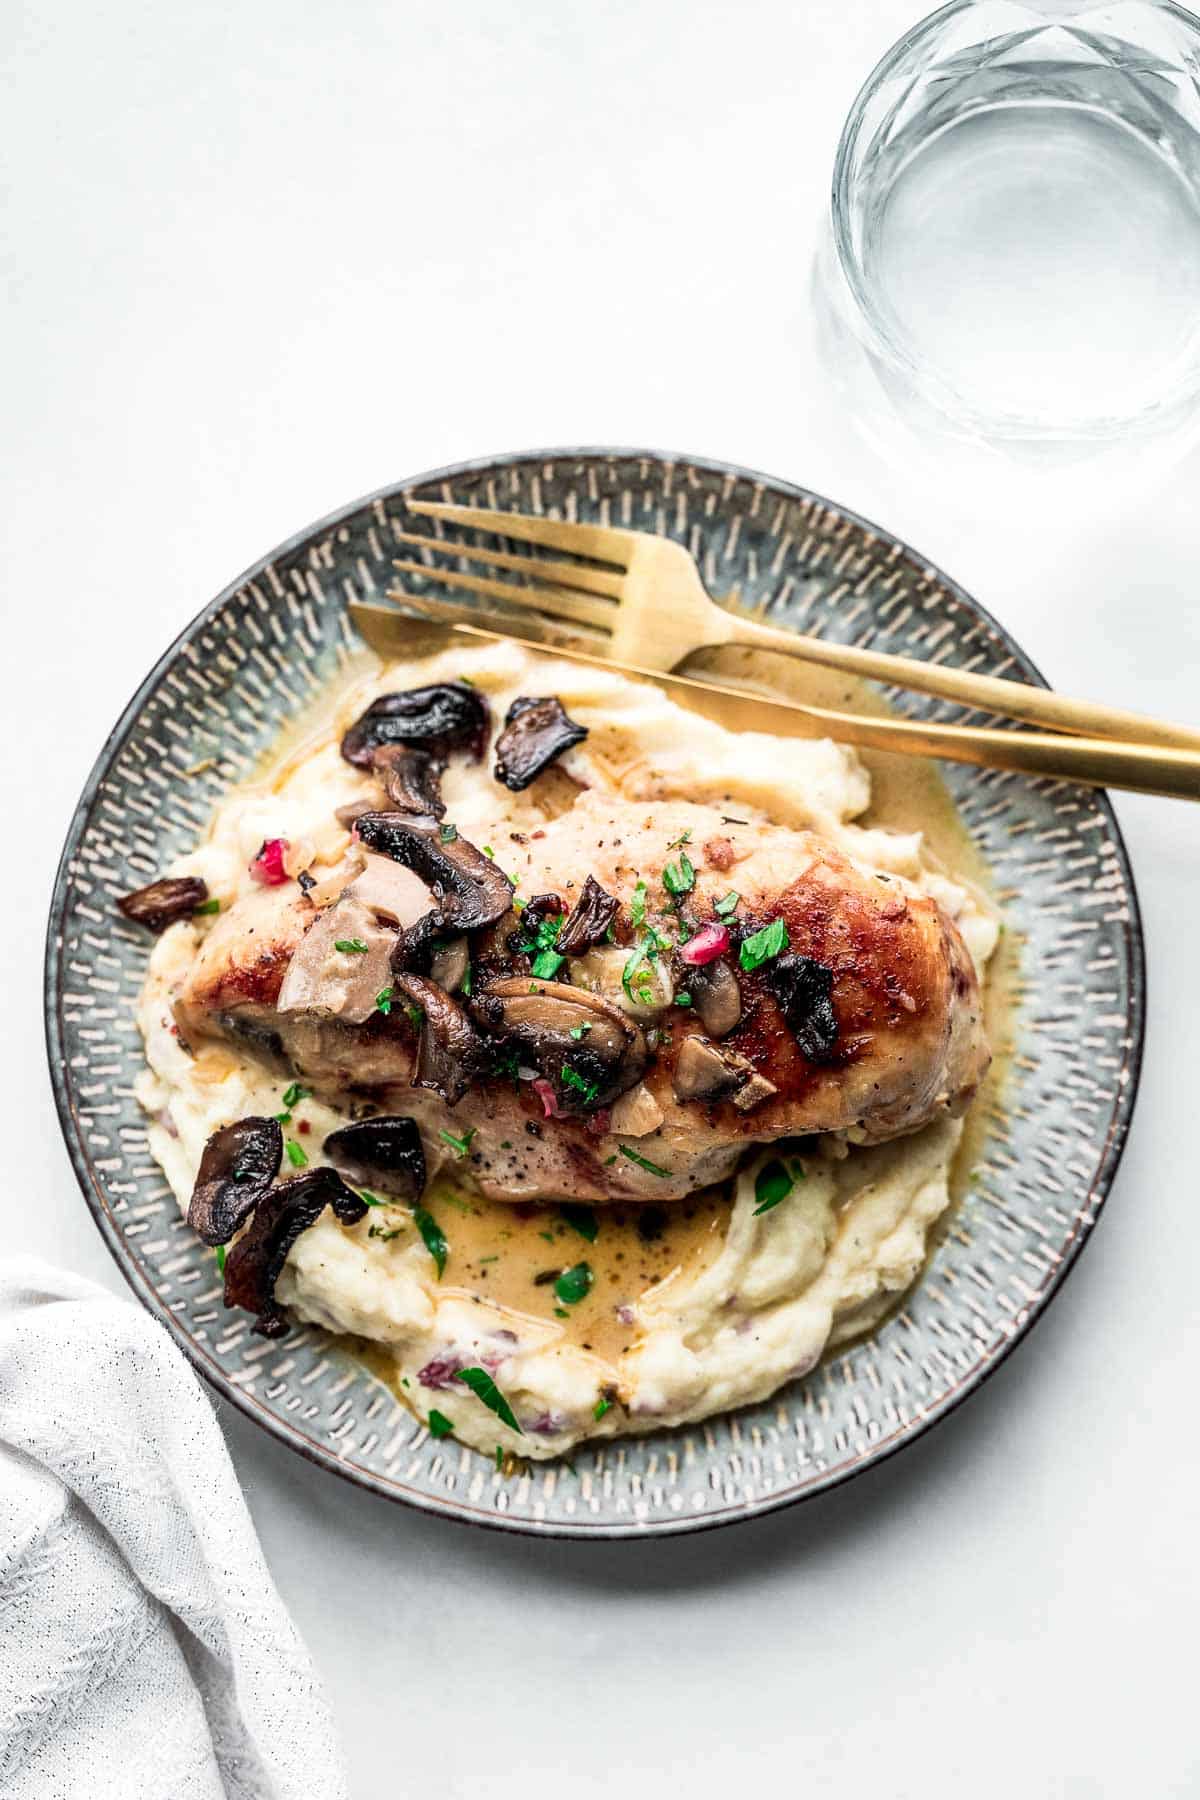 mushroom chicken with mashed potatoes on plate.